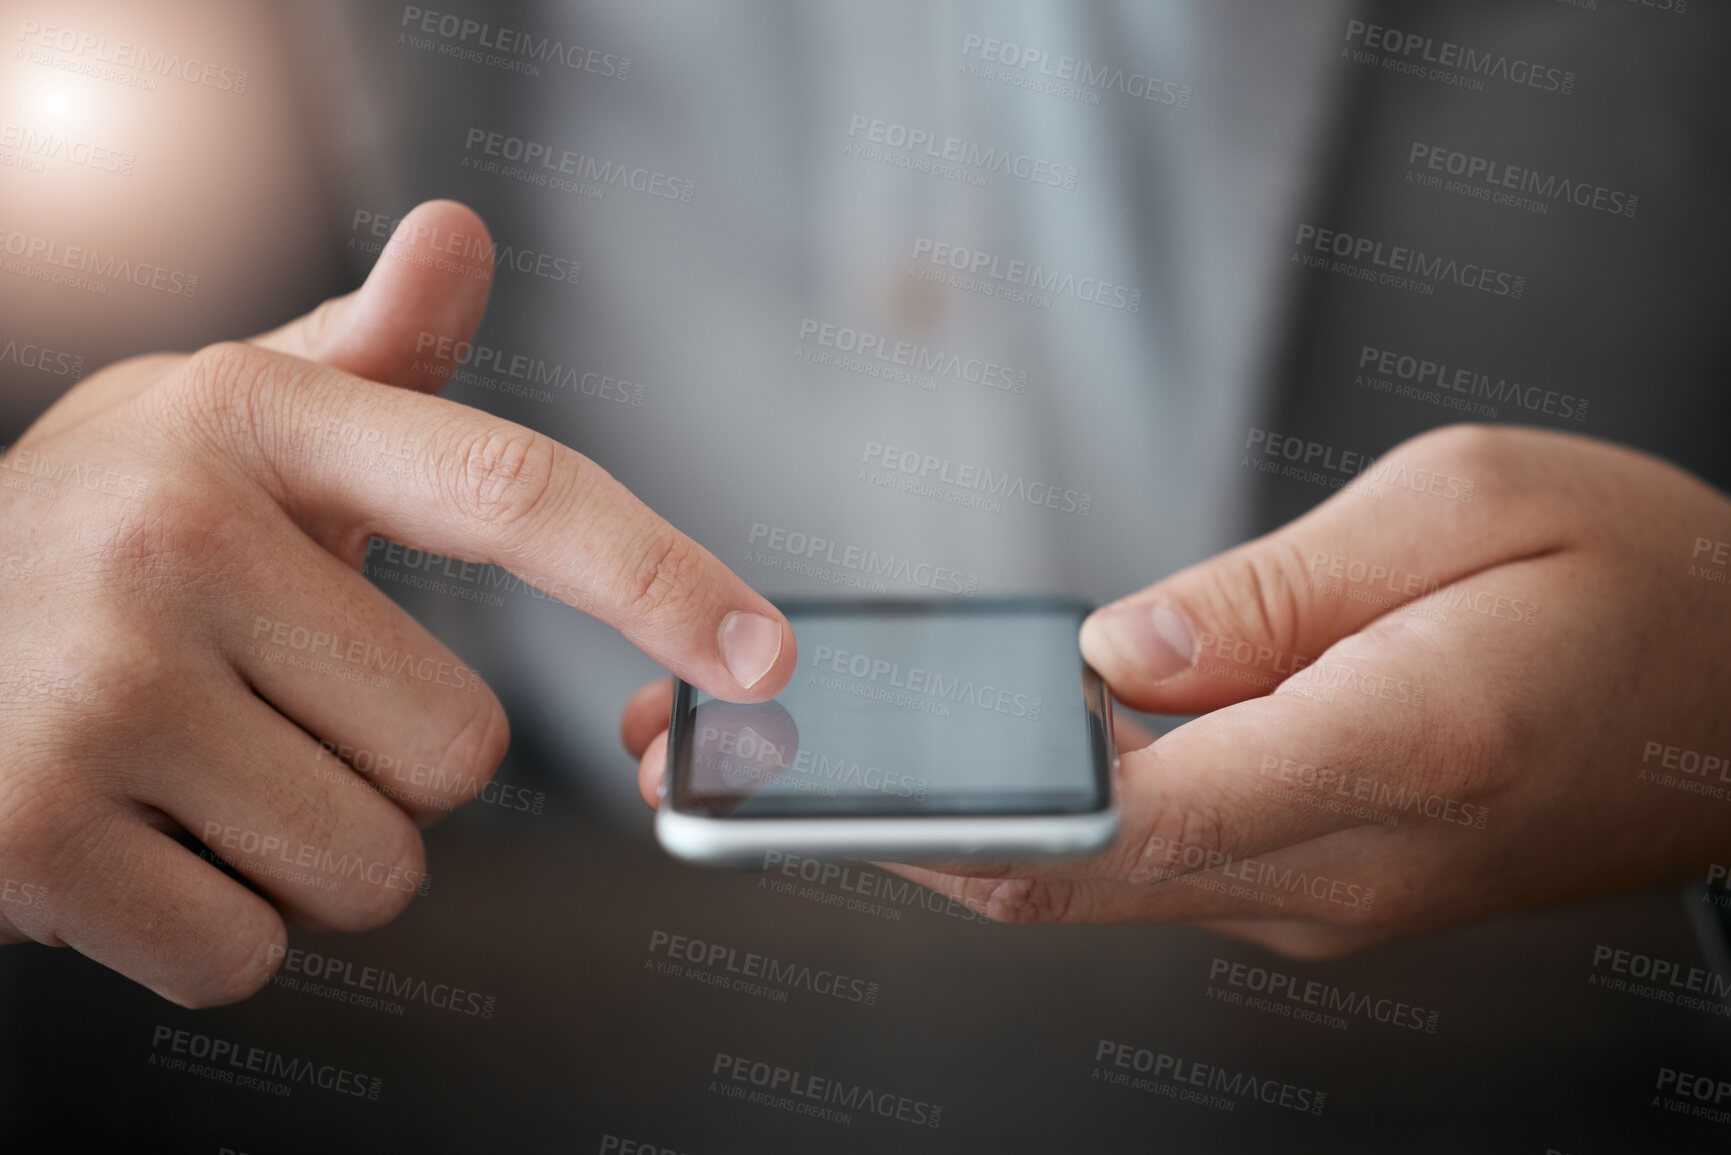 Buy stock photo Zoom of hands, businessman with phone or 5g network for networking, communication or typing email text or message. Chicago, mobile or smartphone for contact us search, internet or social media app.